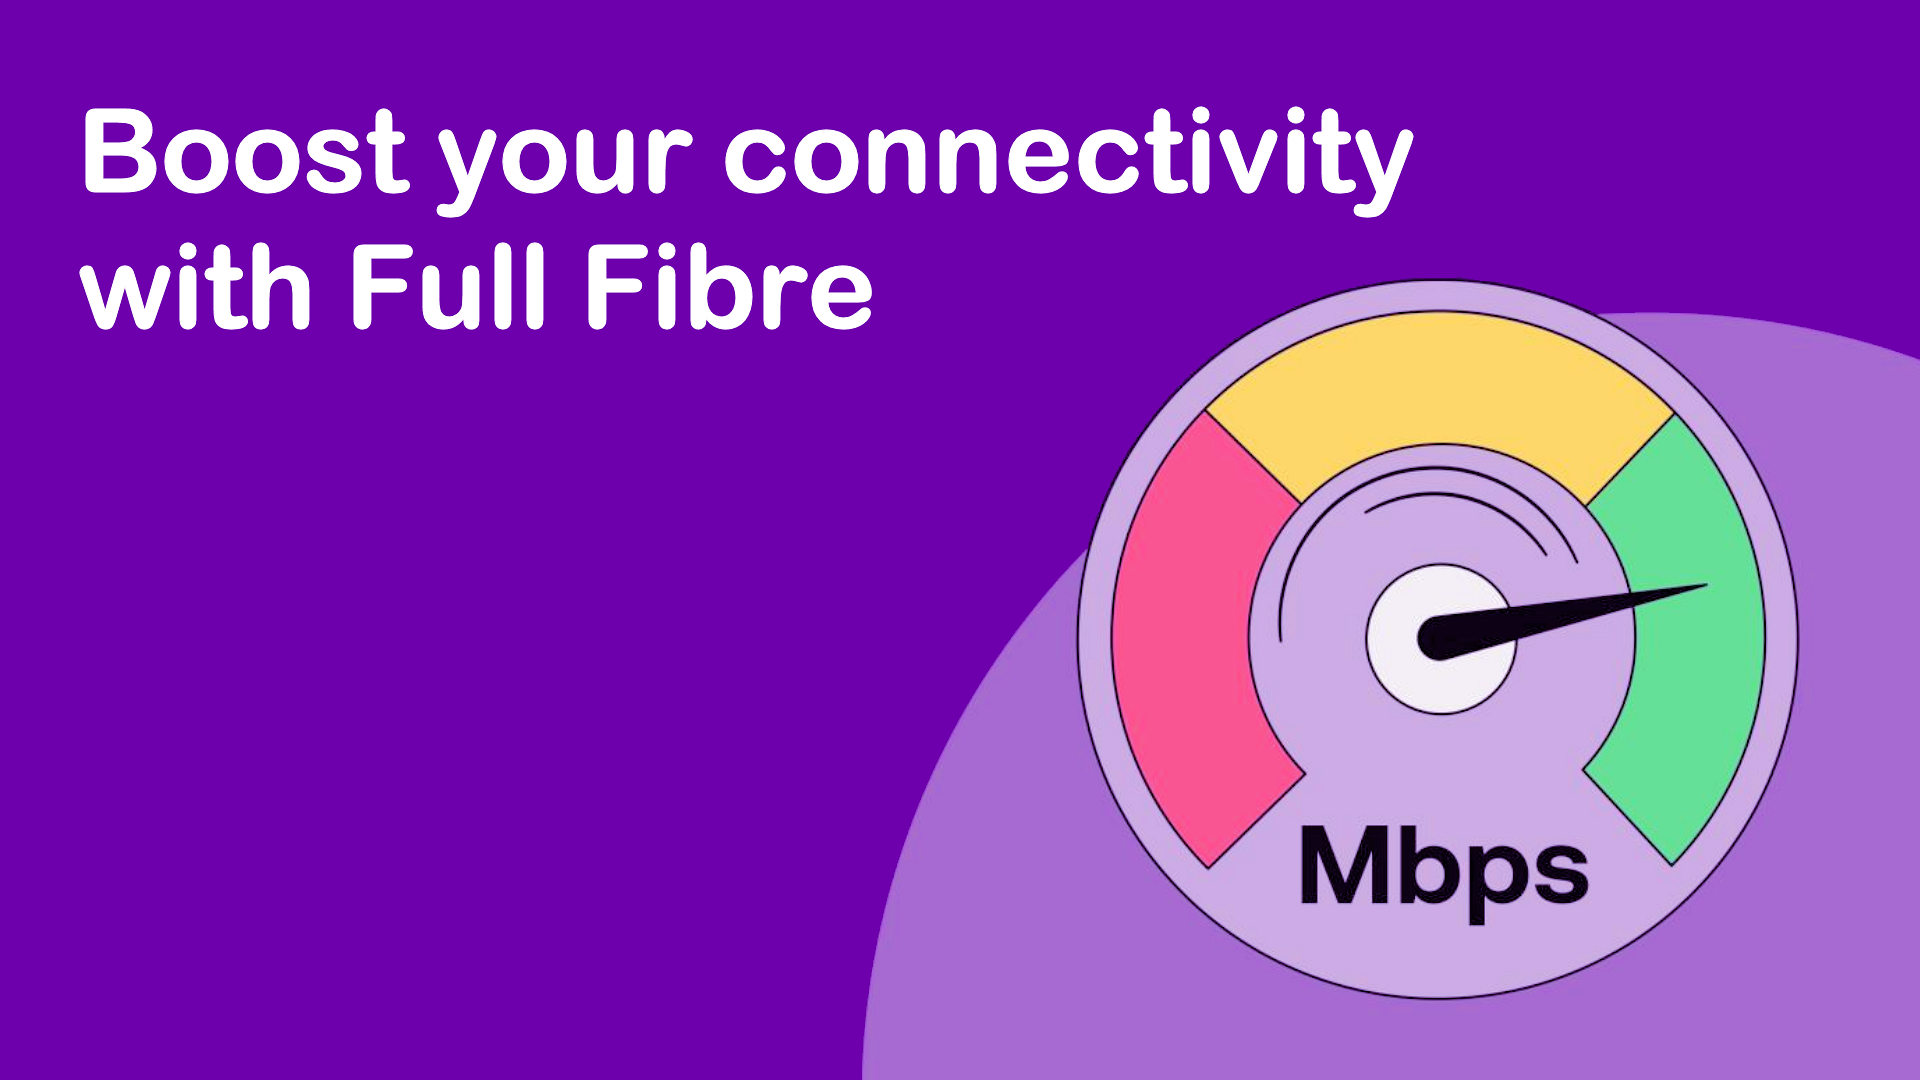 Future proof your Internet connection with UW Full Fibre broadband